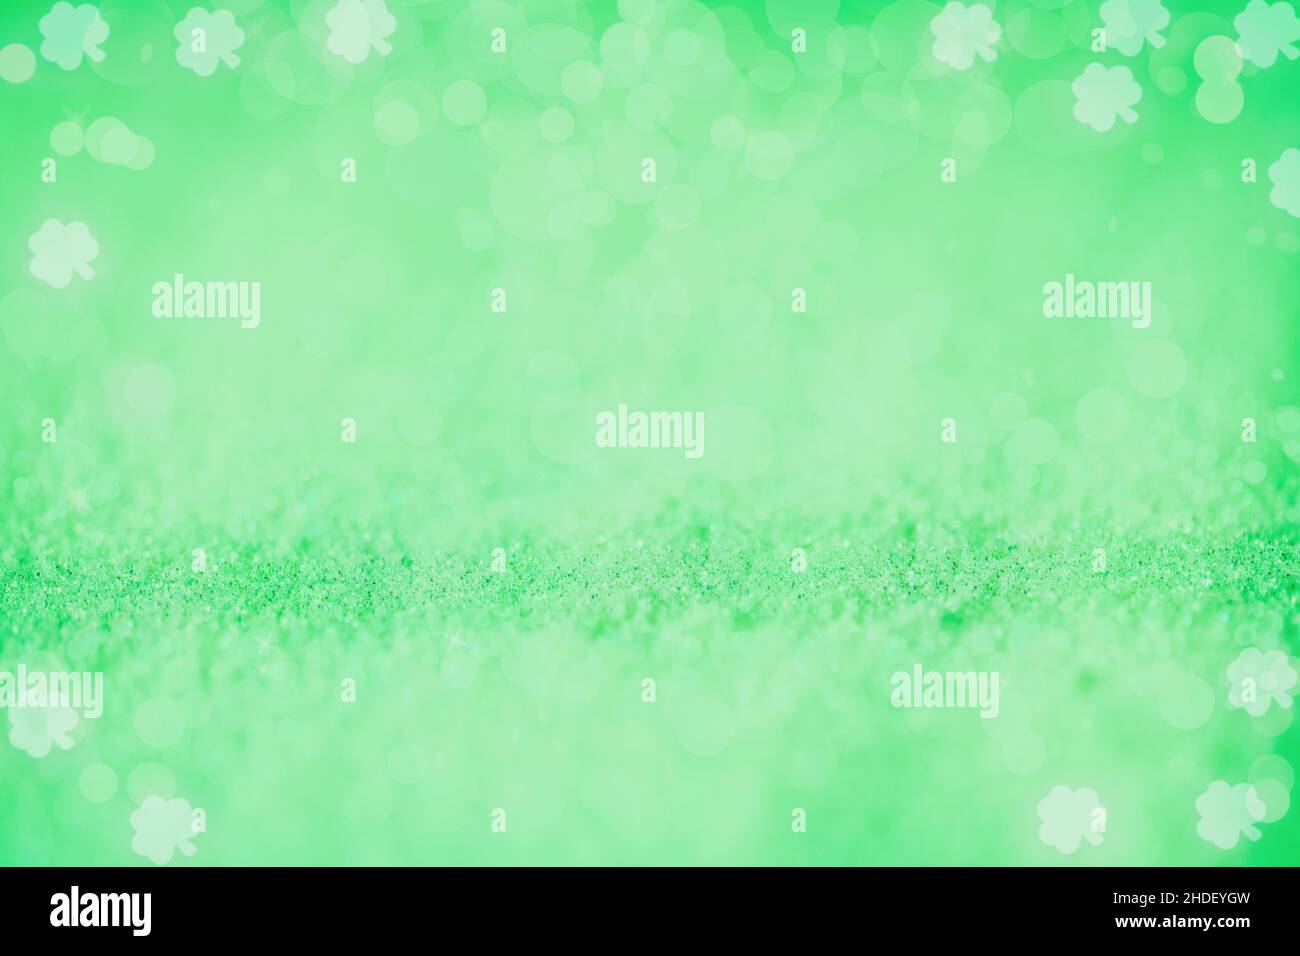 Beautiful bright blurred green glitter bokeh background with shamrock designs perfect for St. Patrick's Day. Stock Photo